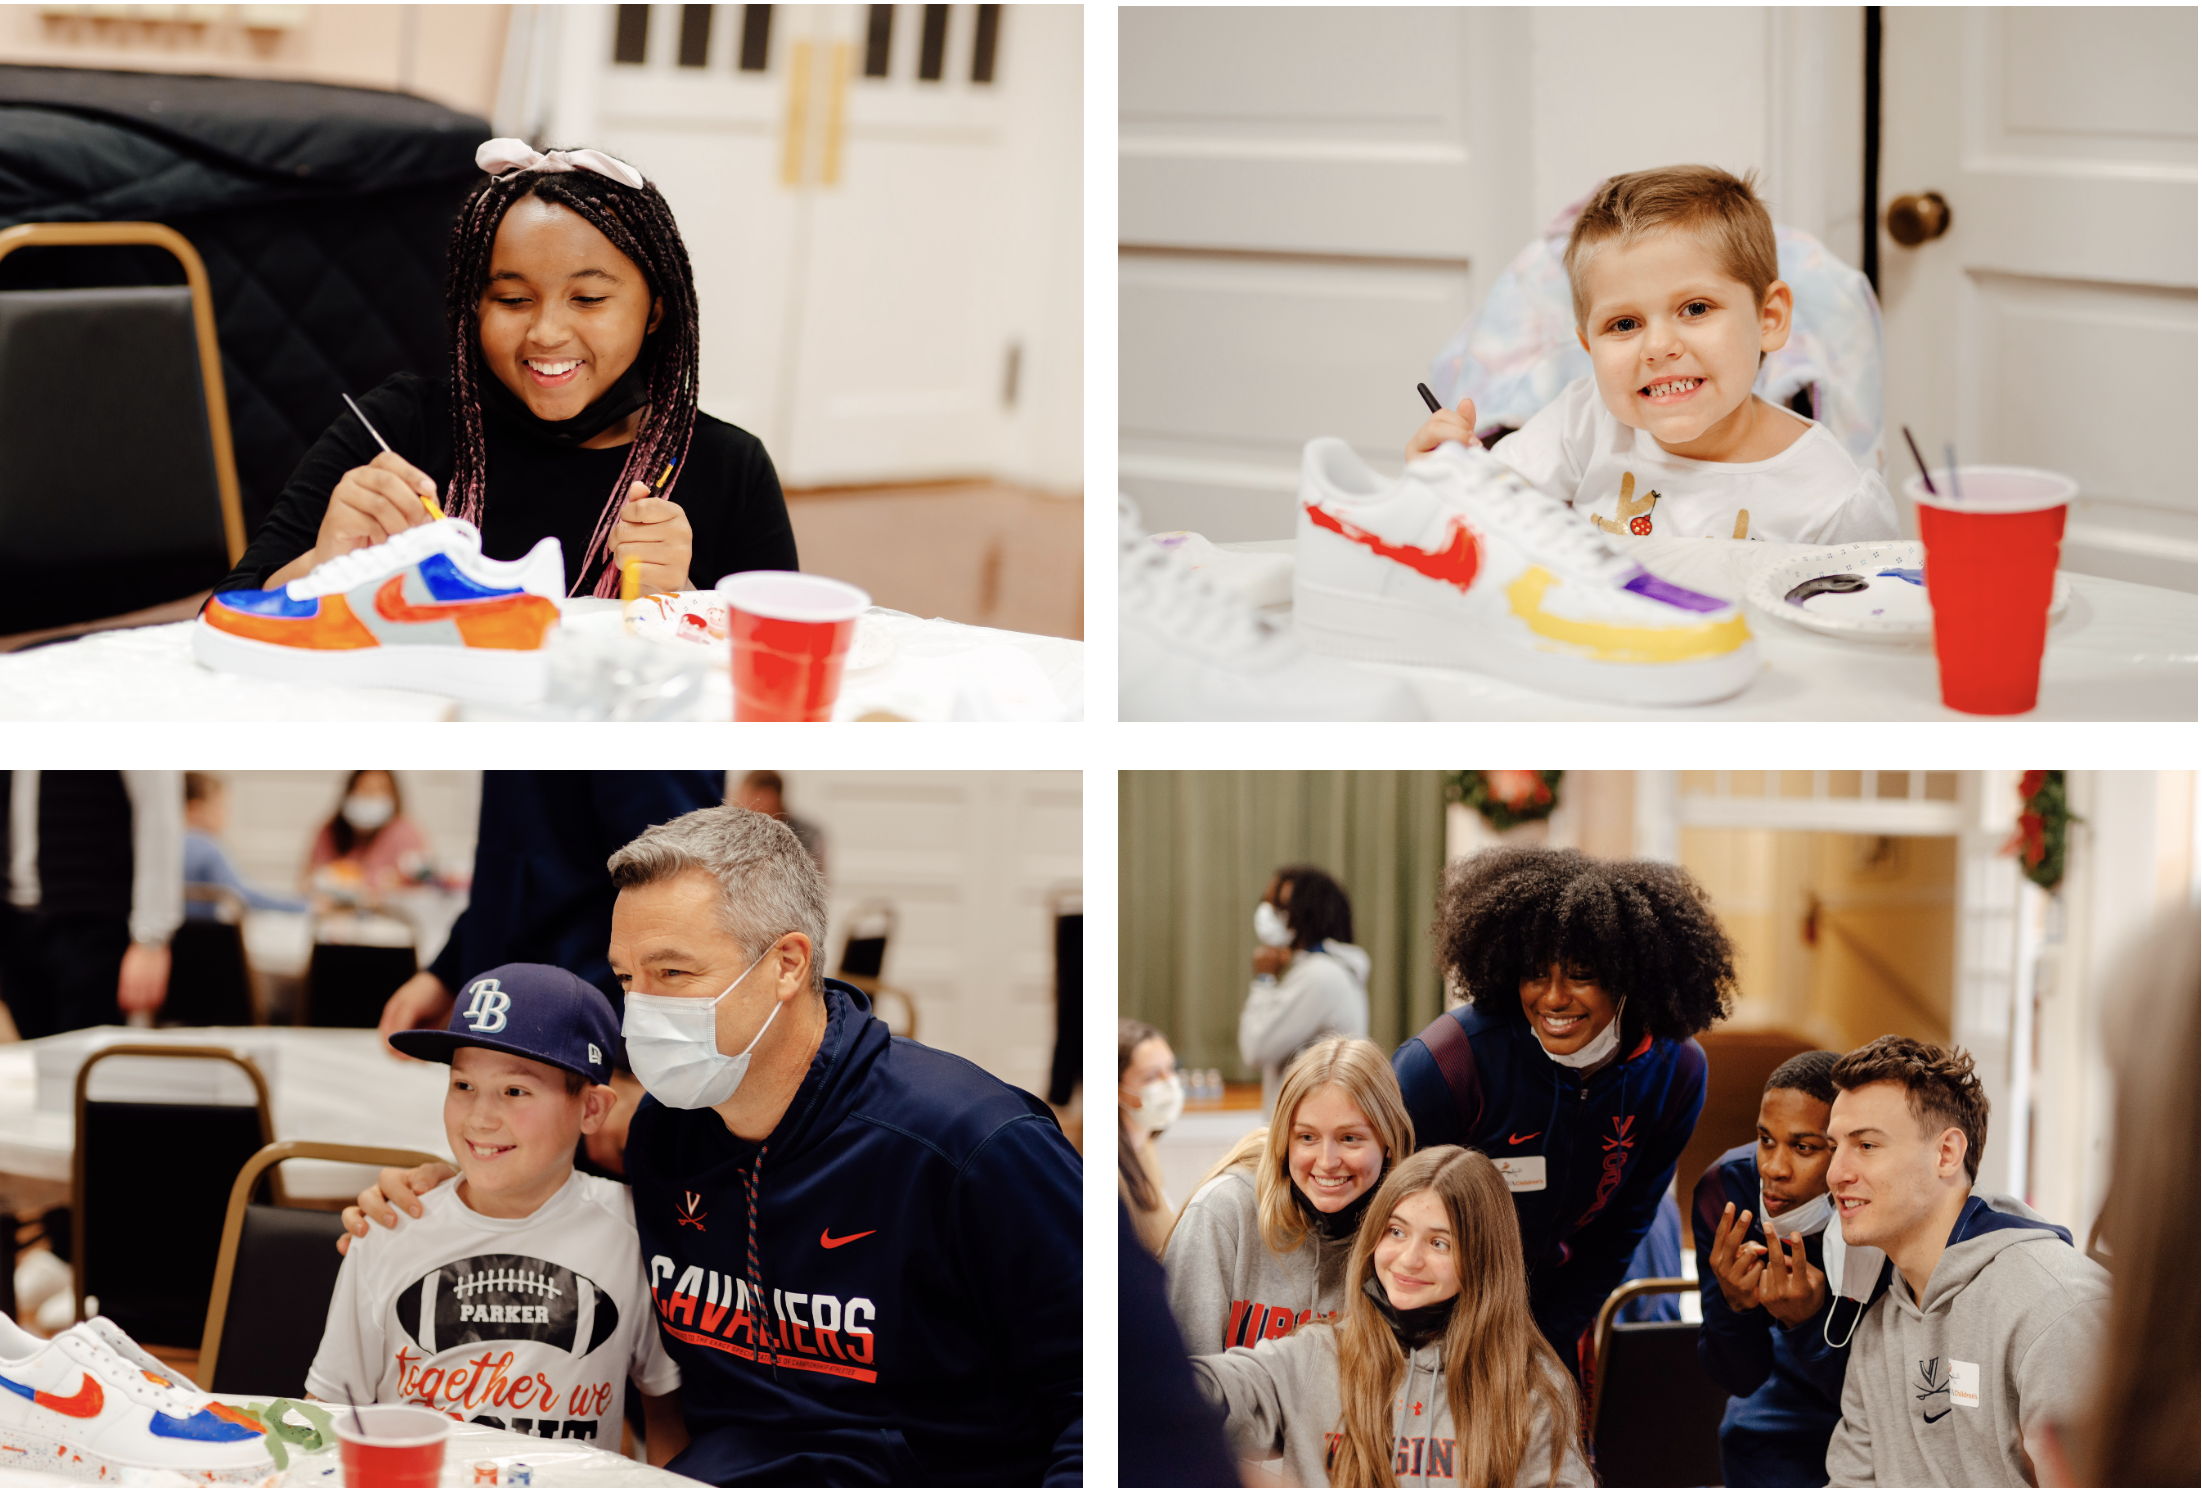 children sitting at tables painting shoes and smiling with UVA basketball players